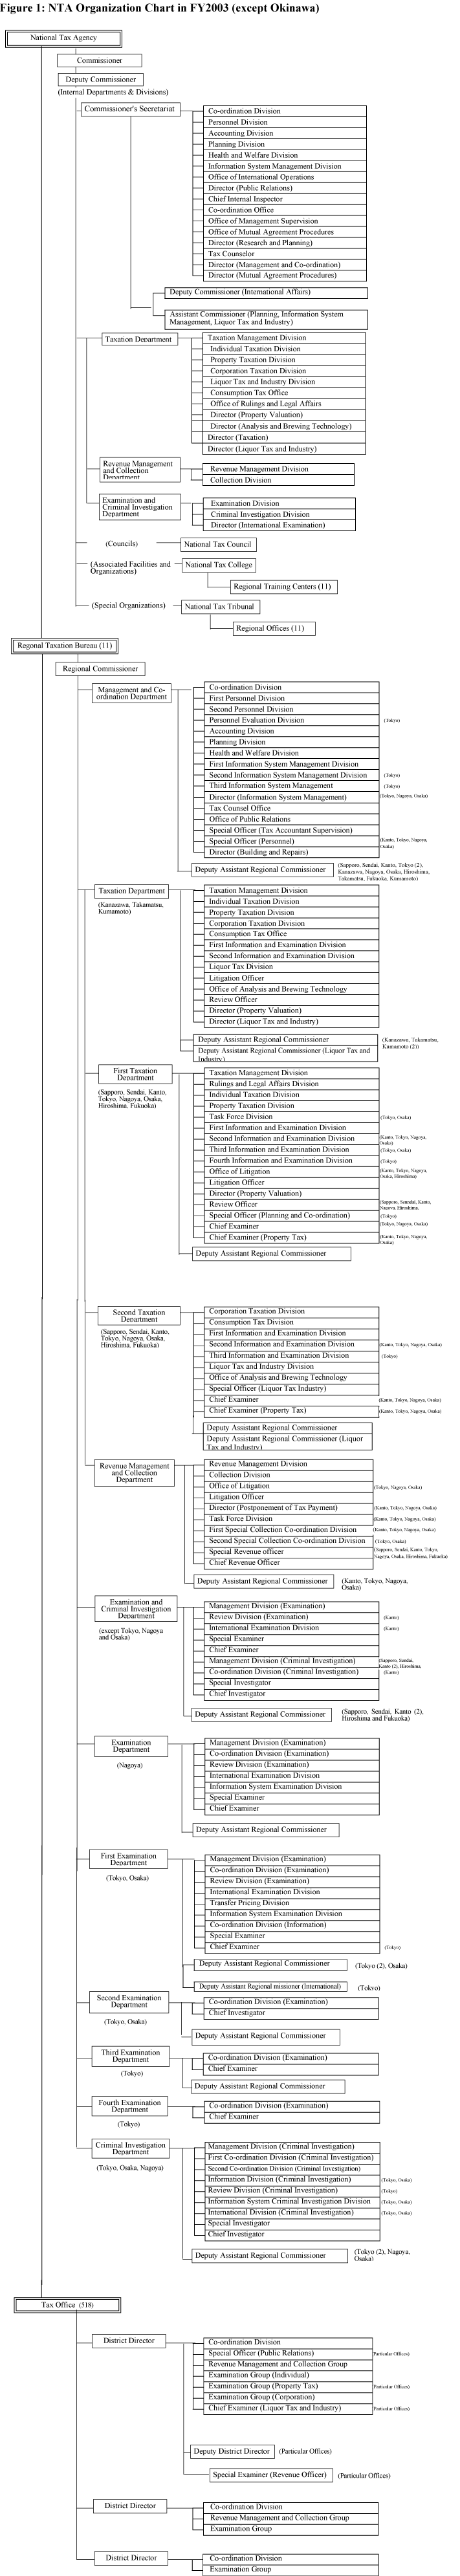 Organizational structure of administrative authorities for national tax　in FY 2003 (except Okinawa)